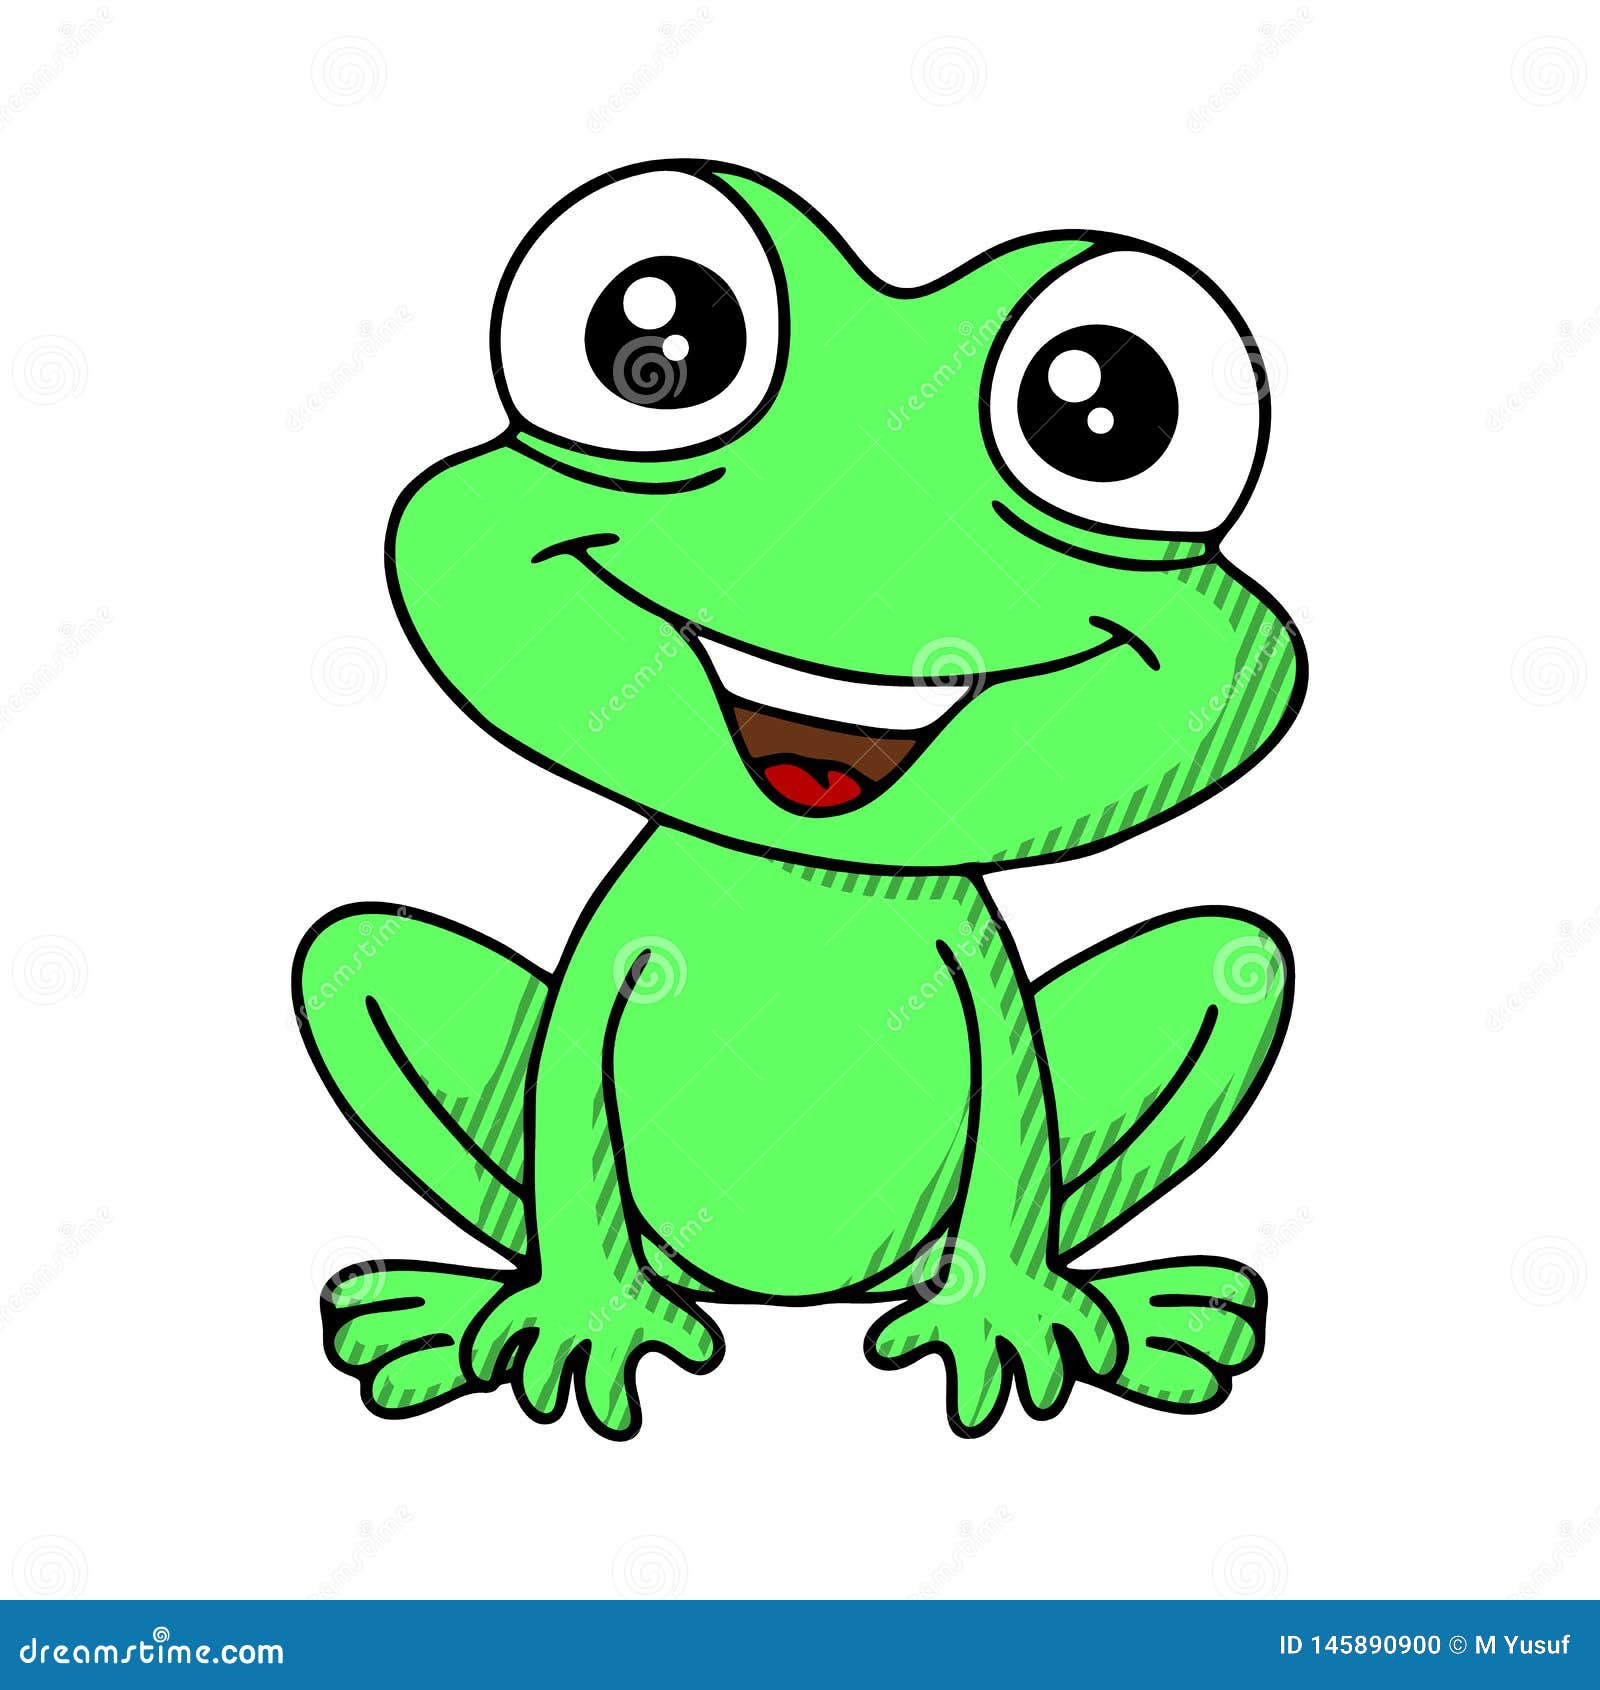 Happy Smiling Frog Vector On White Backround Stock ...